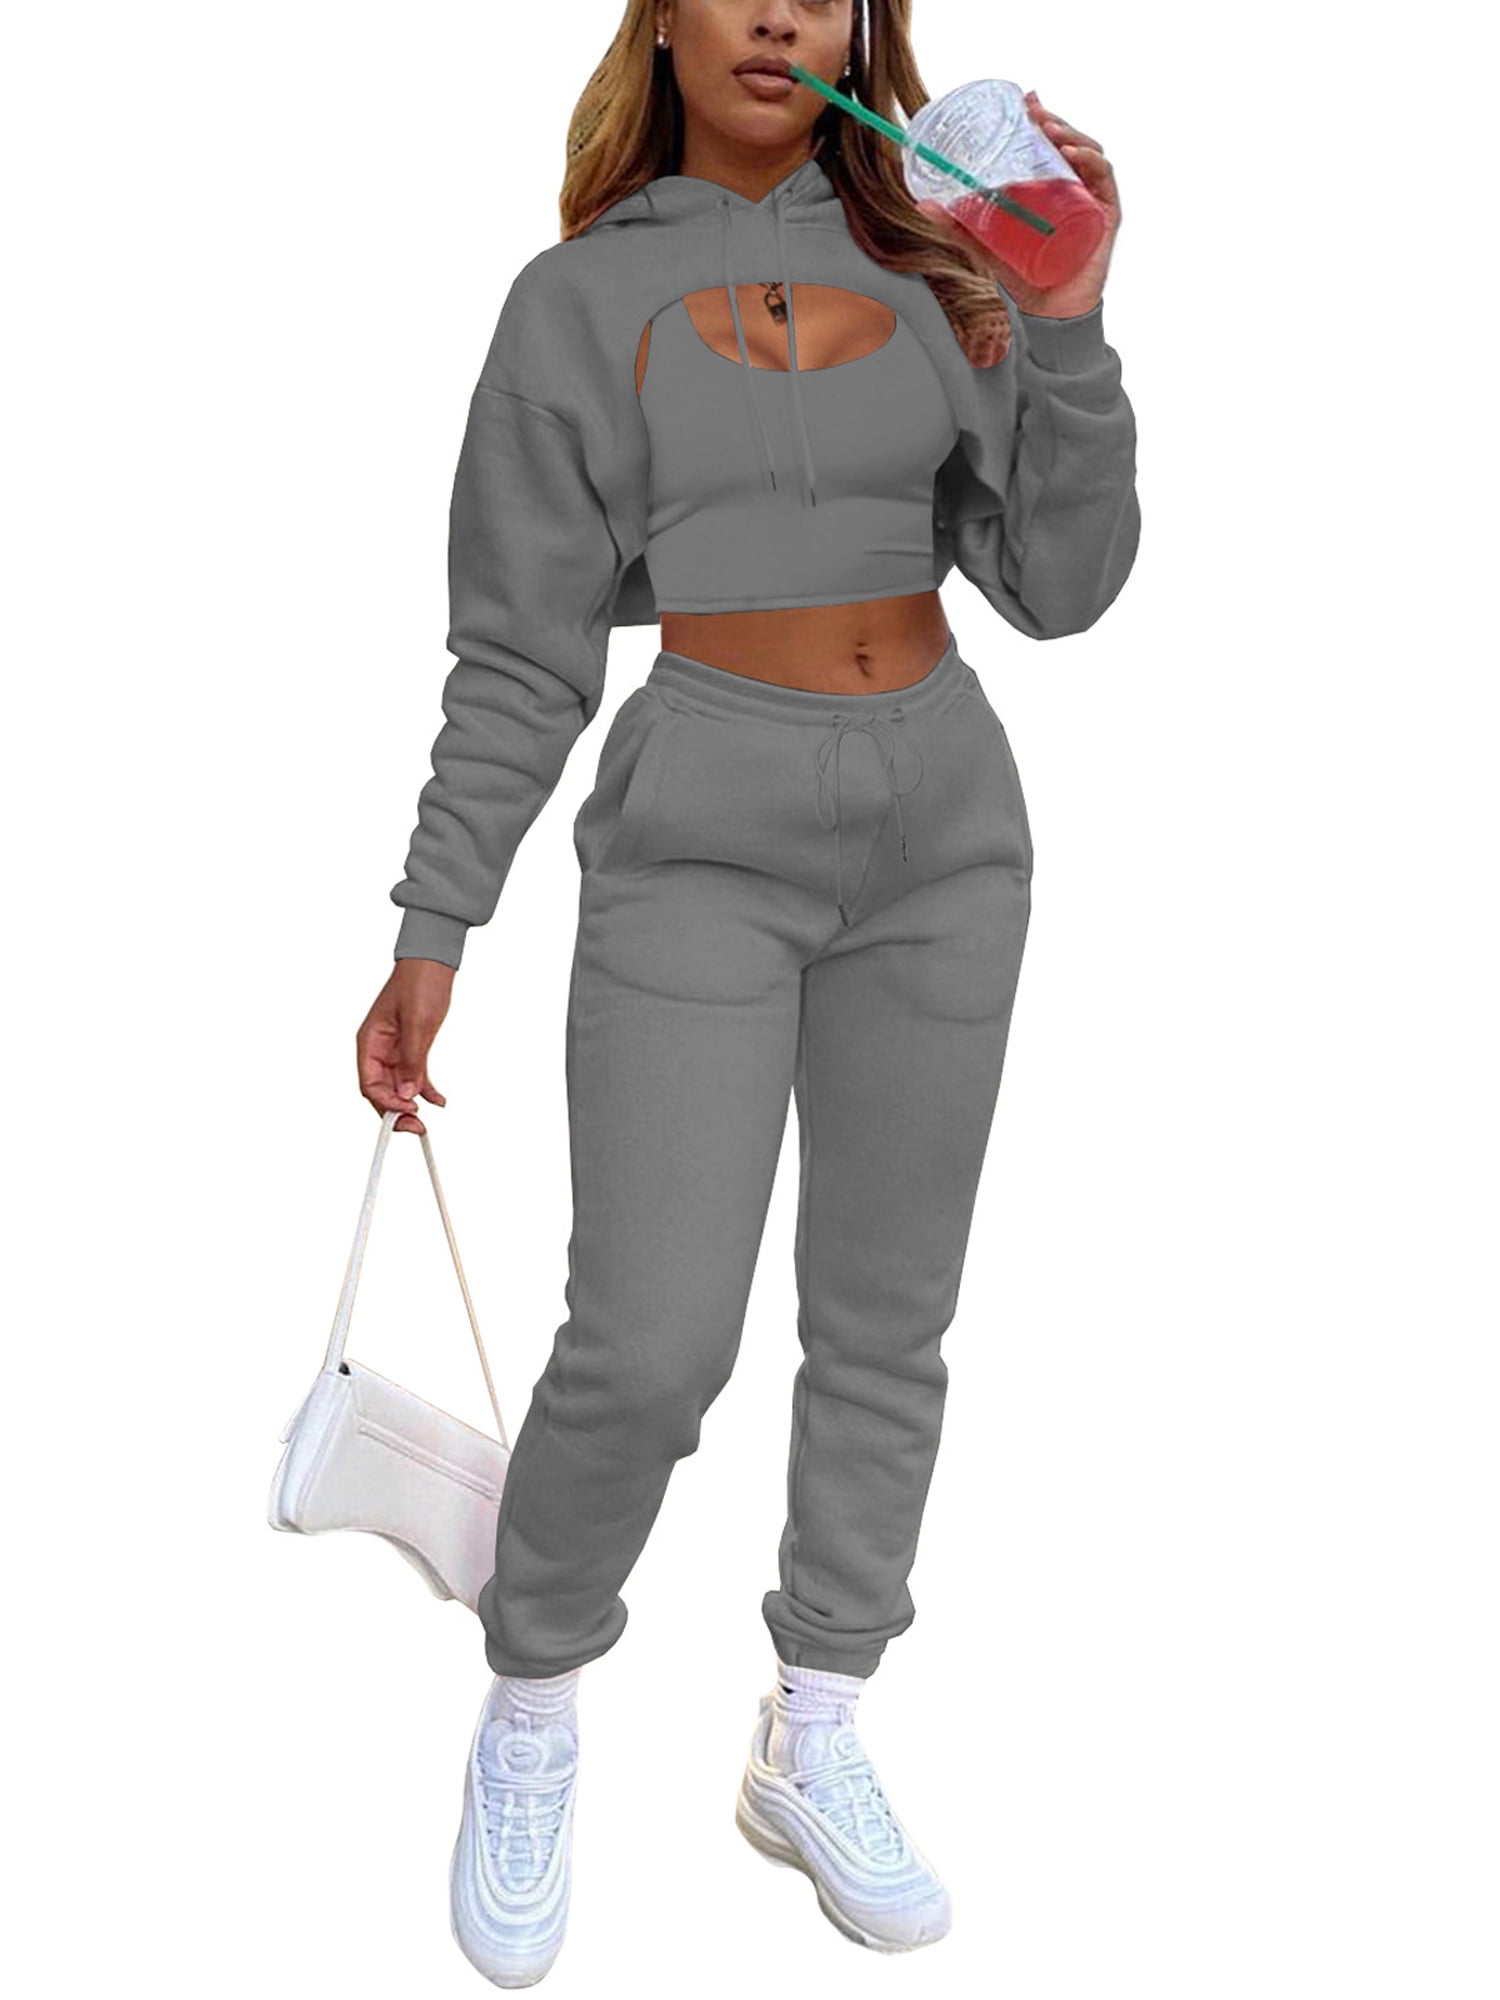 Classy Winter Tracksuit Set For Women Fleece Hollow Out Cropped Hoodie And  Cotton Vest Jogging Pants From Wumartstore888, $22.98